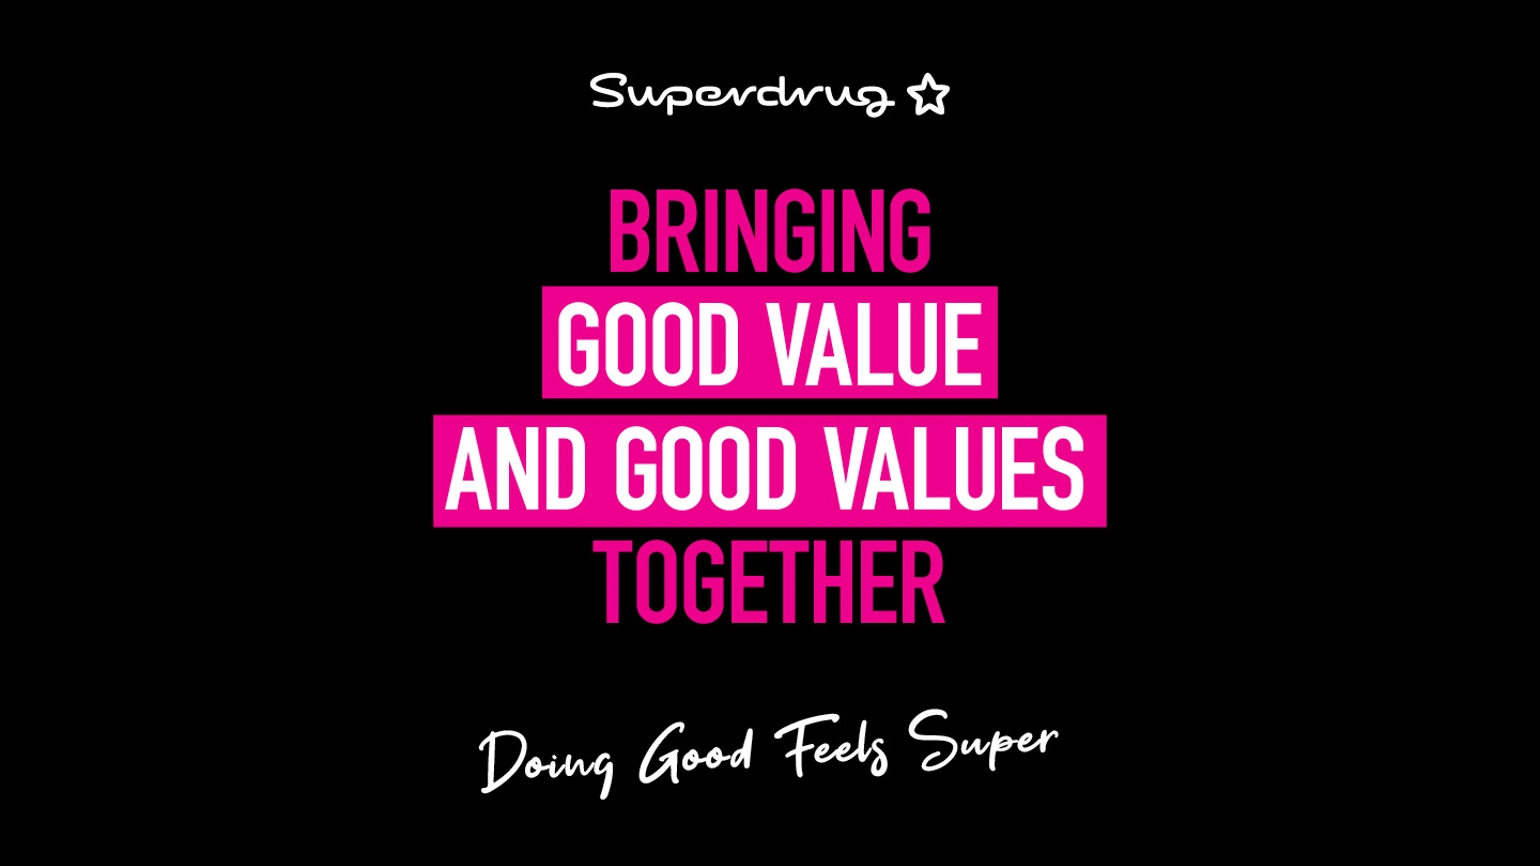 Image with the Superdrug logo and the words bringing good value and values together. Doing good feels super